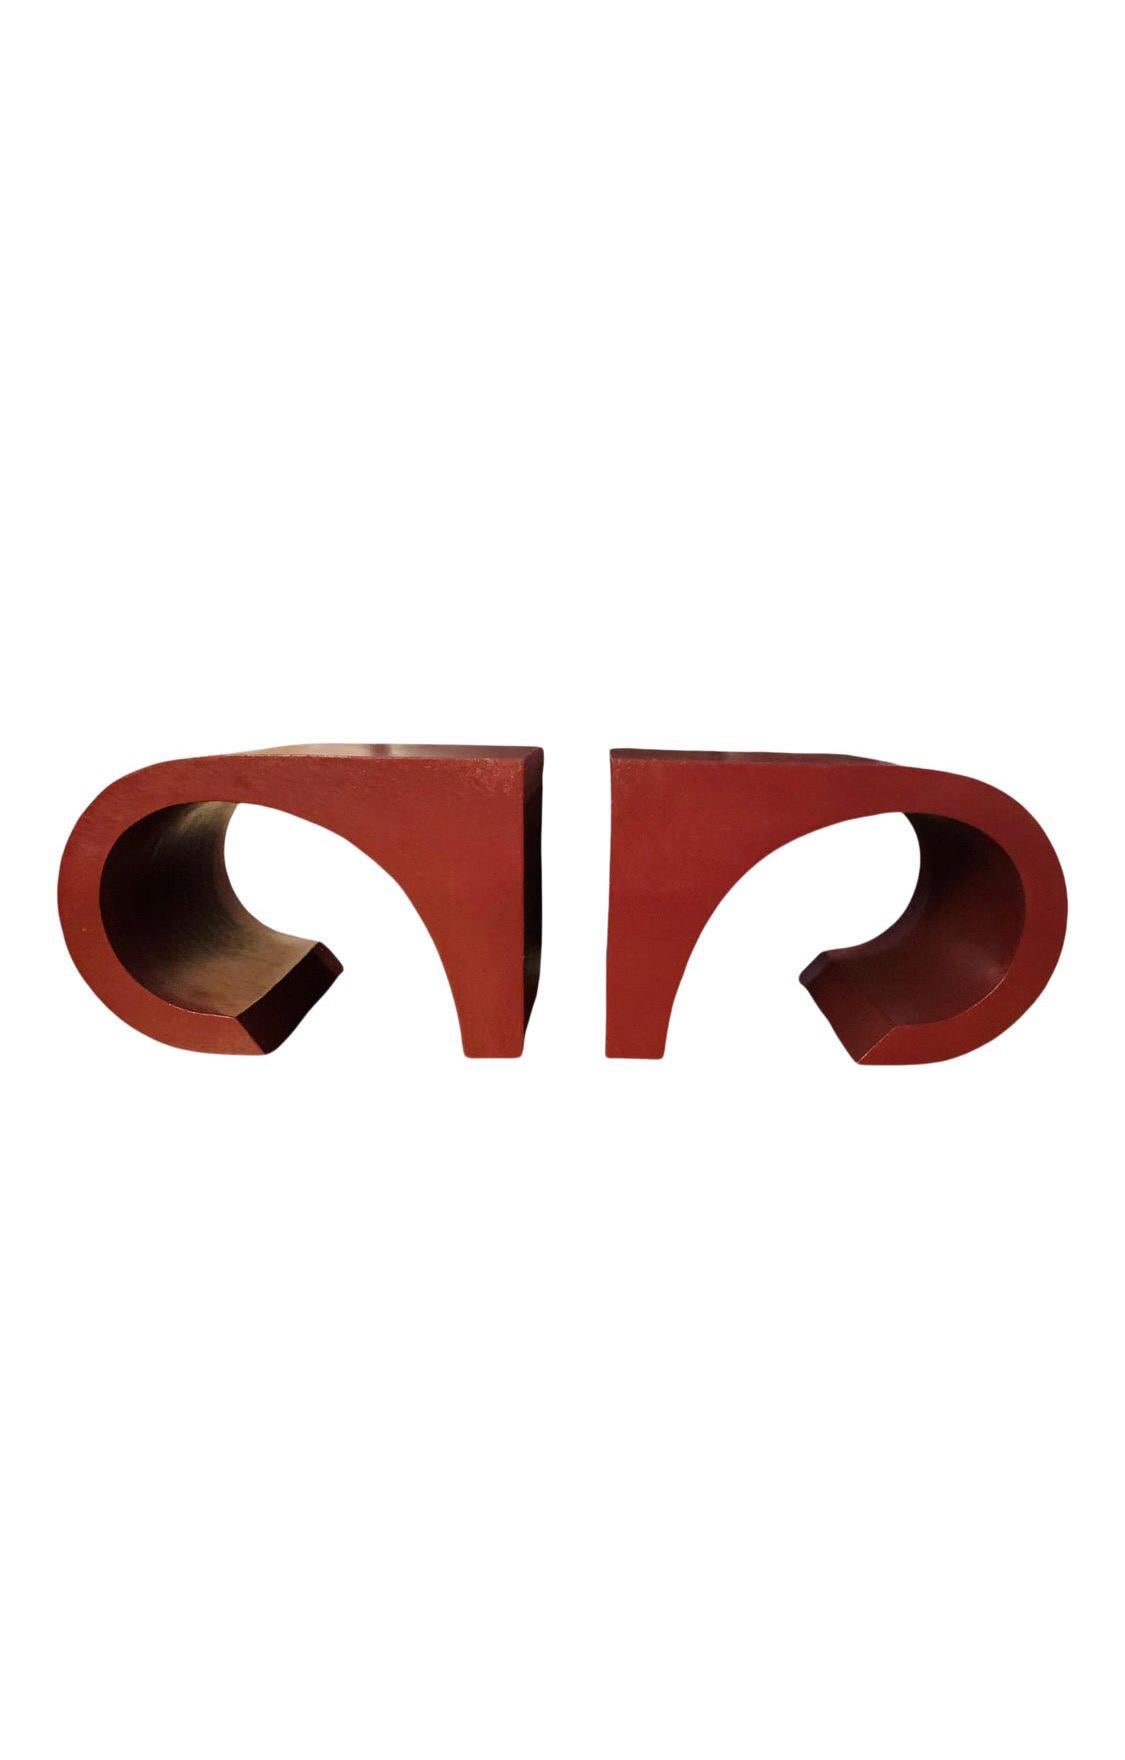 Unusual curvy sculptural tables in a linen-wrapped plum-lacquered finish.

Rumored to have been manufactured in one of Karl Springer's regular workrooms that produced his pieces.

Beautiful solid condition.


These would benefit from a new